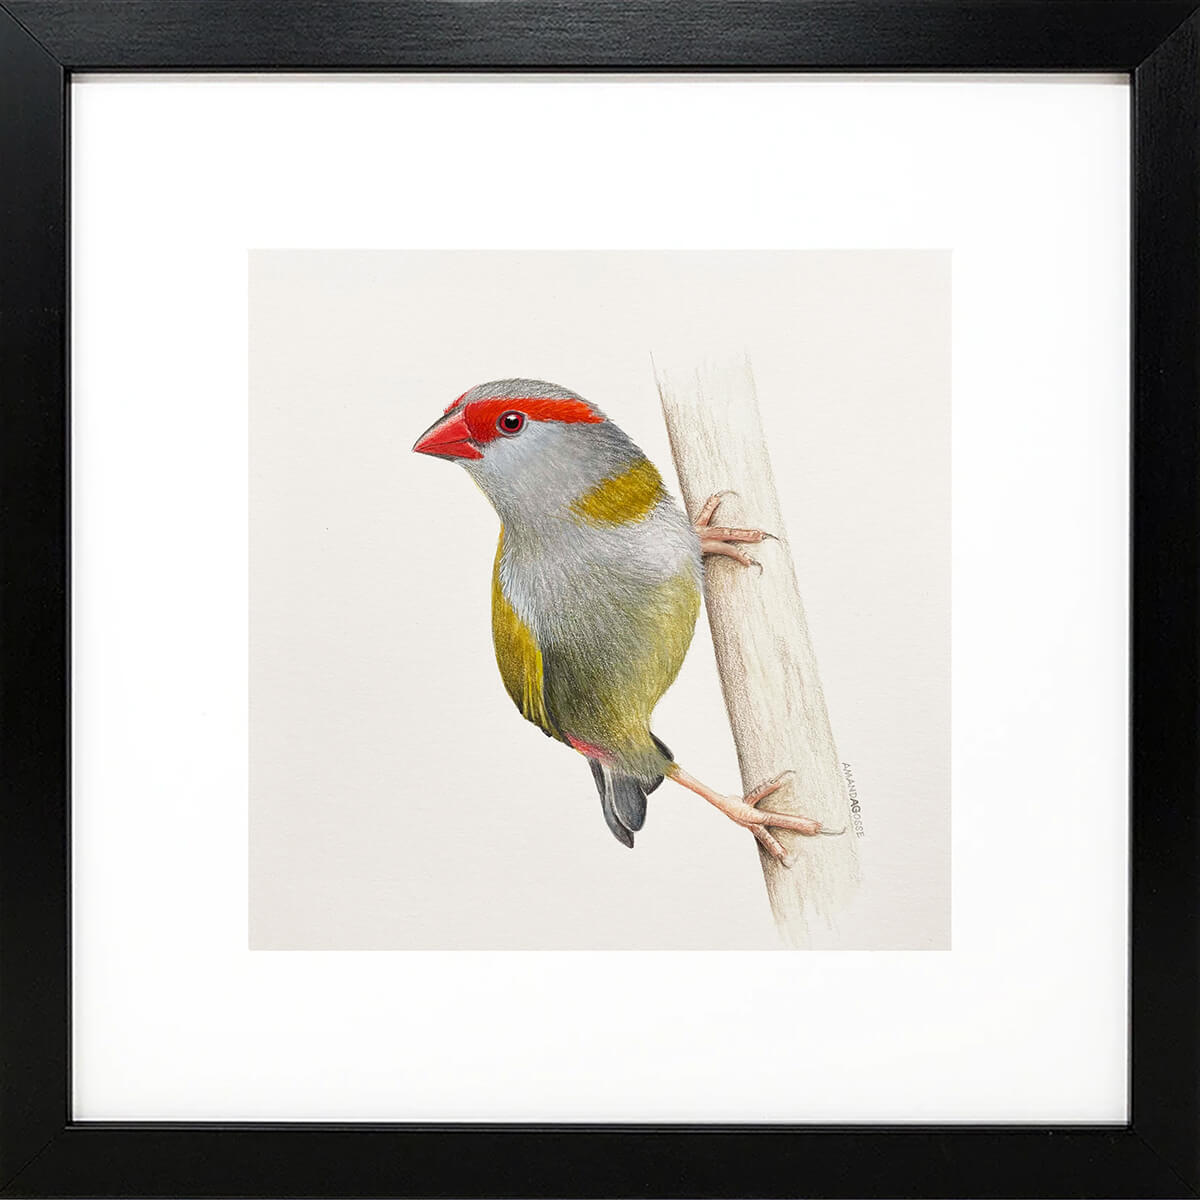 Original framed gouache on paper painting of a red-browed finch bird by artist Amanda Gosse